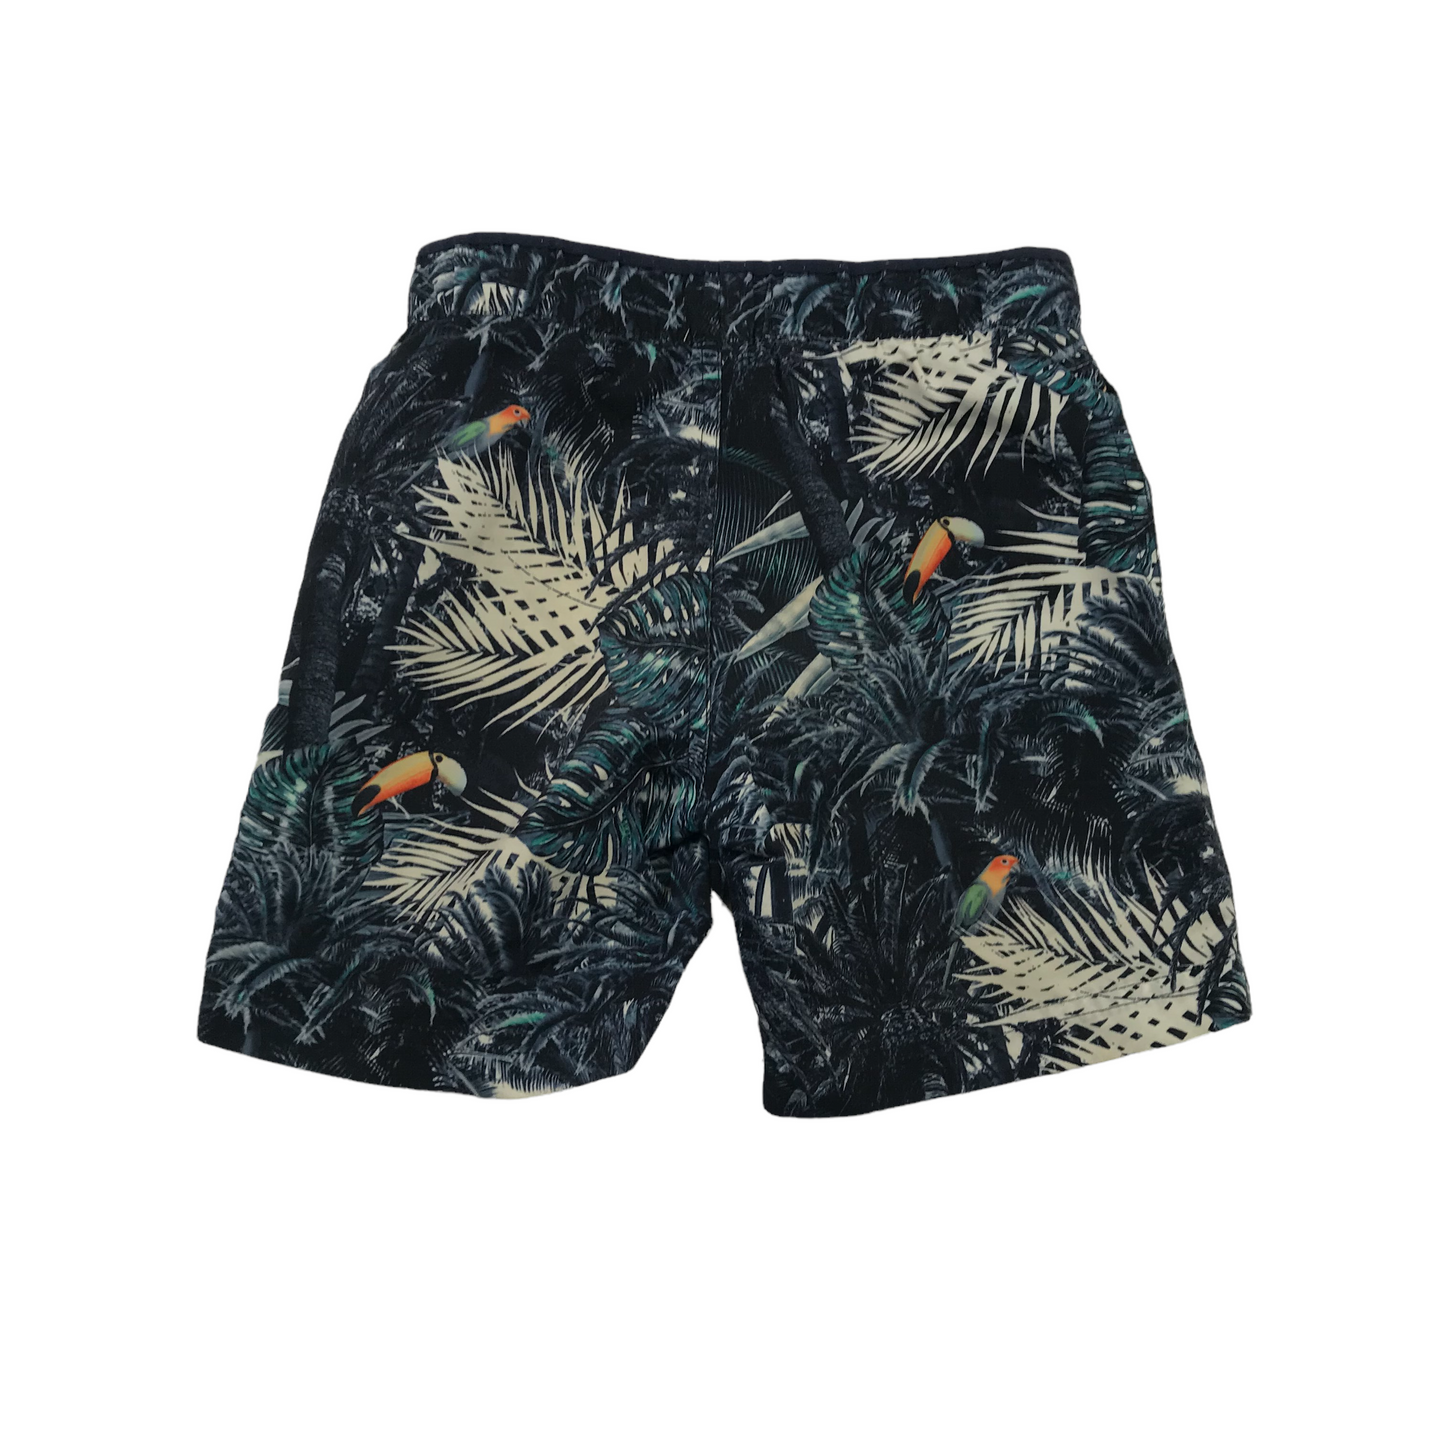 Timberland Leafy Parrot Swim Trunks Age 6